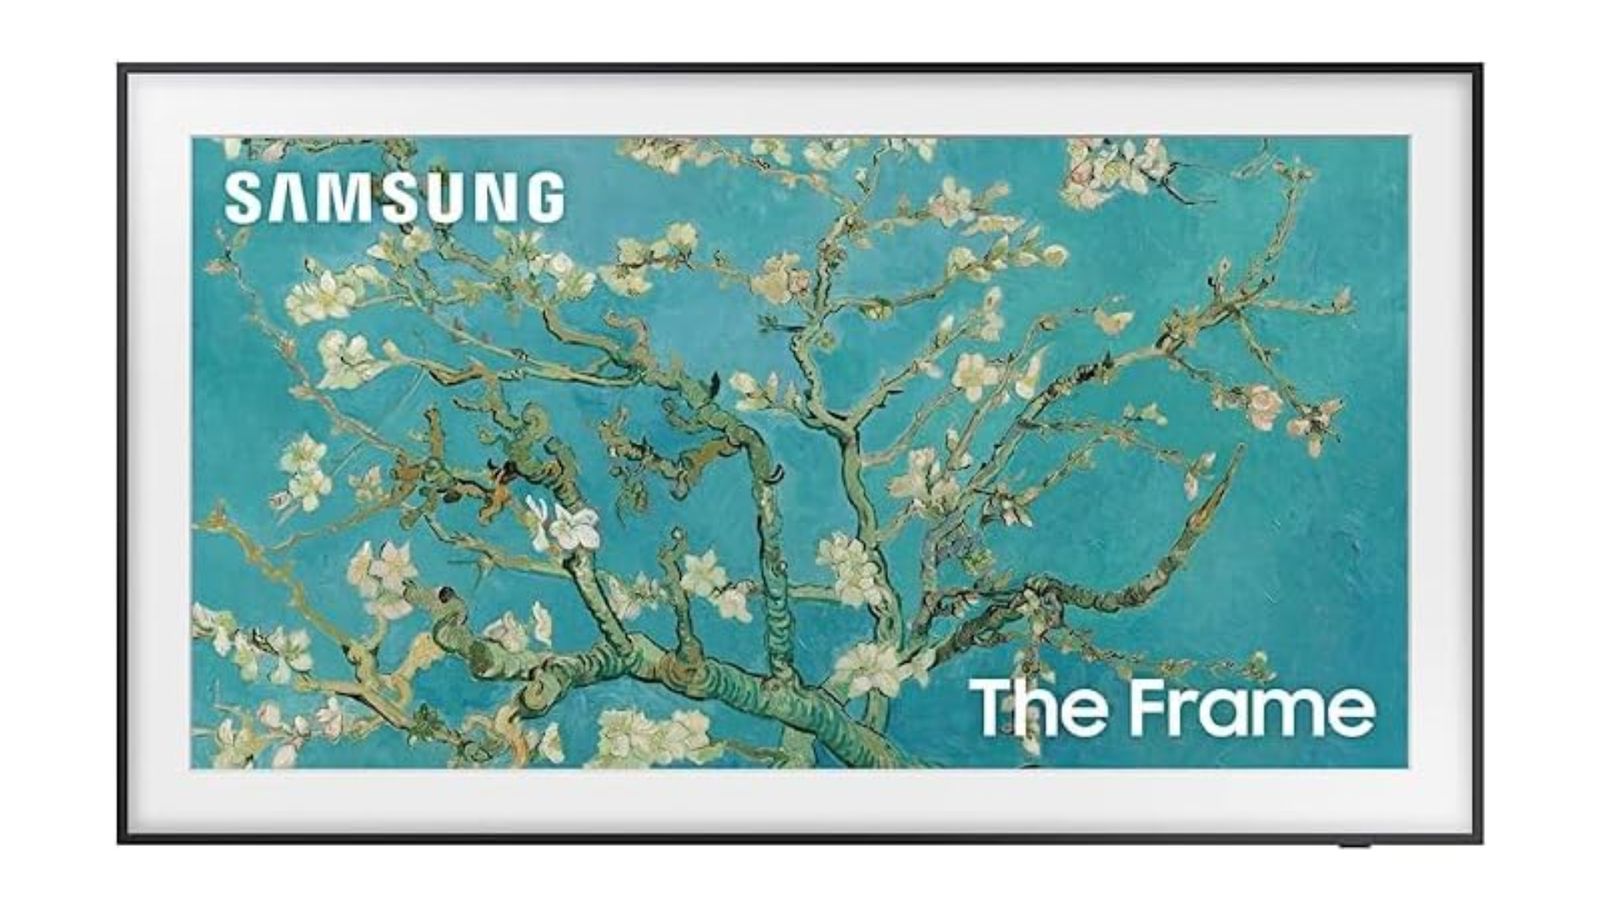 Samsung The Frame TV product image of a white and black-framed TV with a white flowery tree on the display.